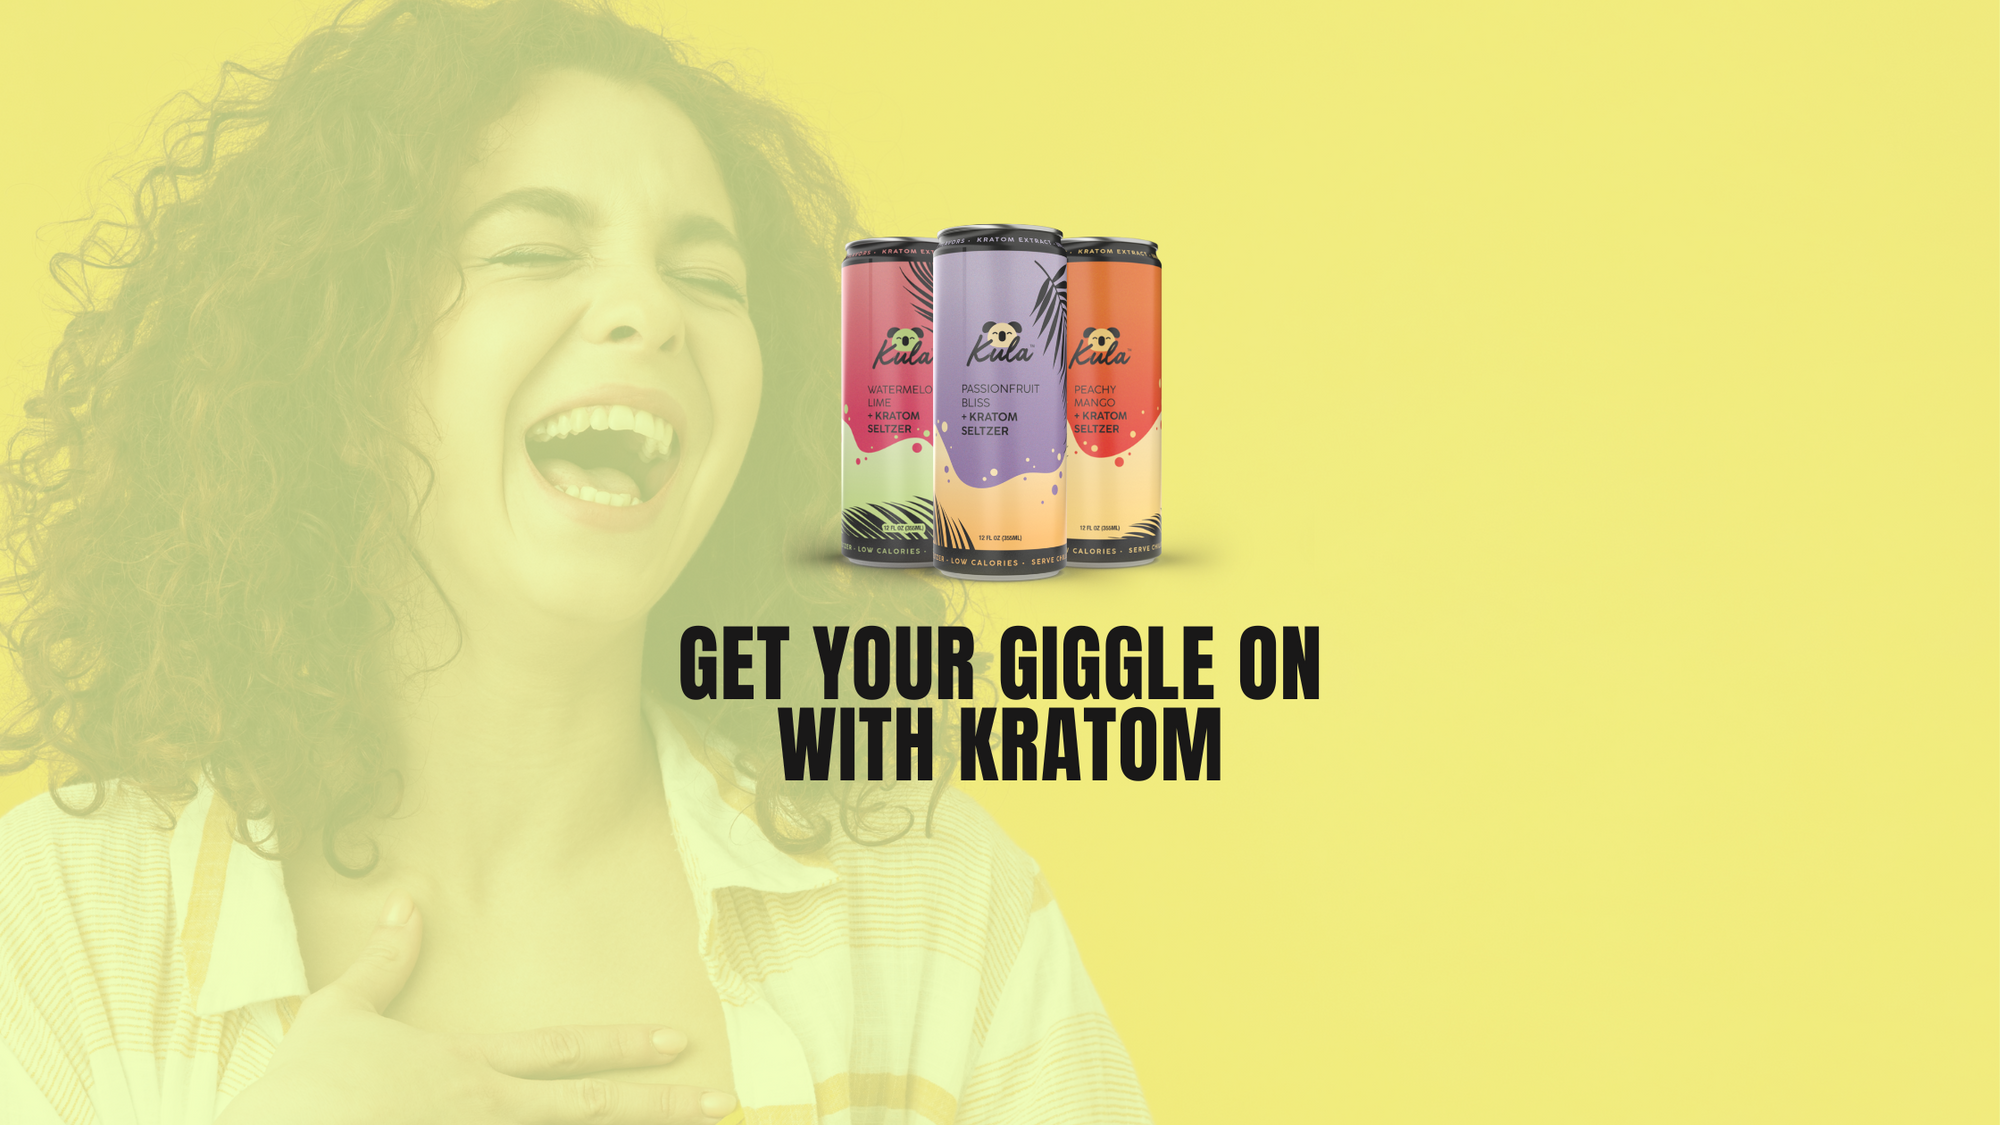 Get Your Giggle On with Kratom